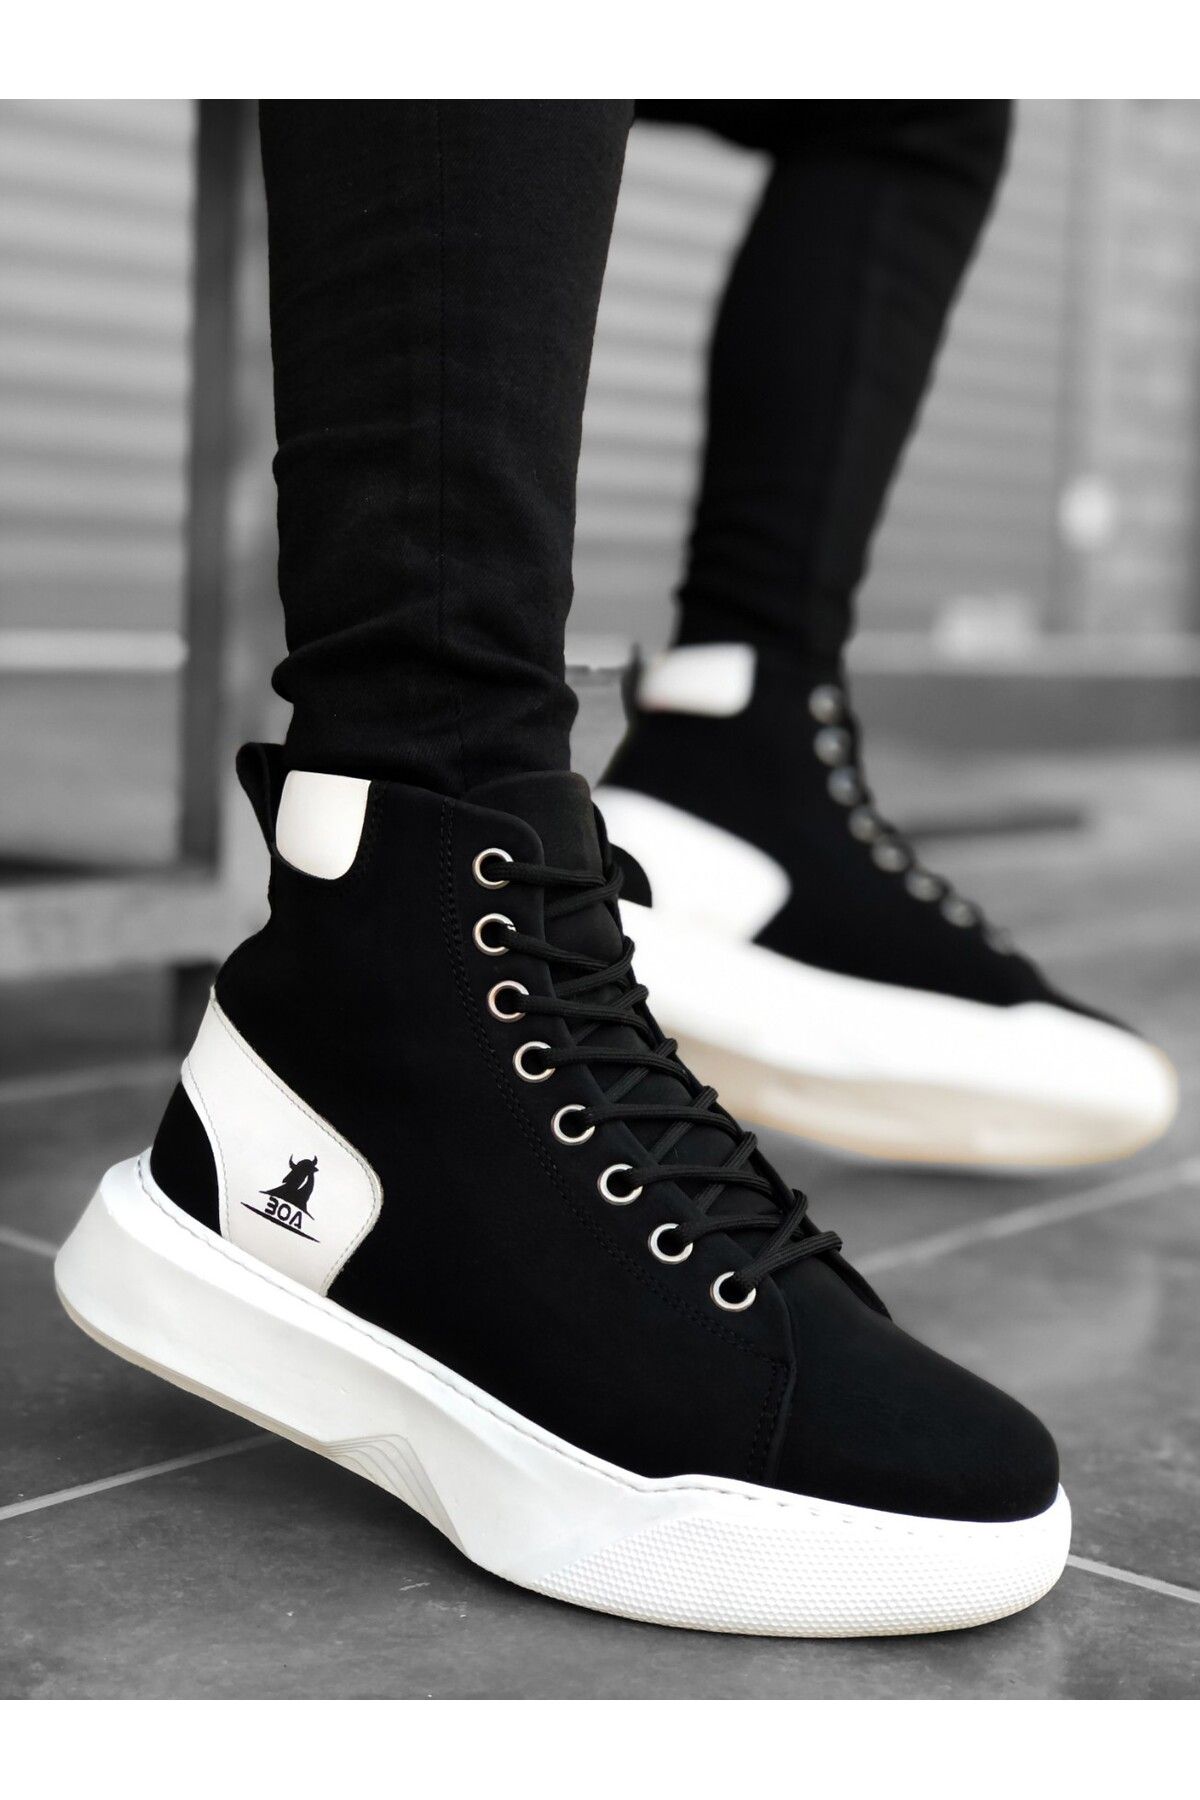 Dastrau Black and White Lace-Up Suede Sports Men's Boots - Trendyol